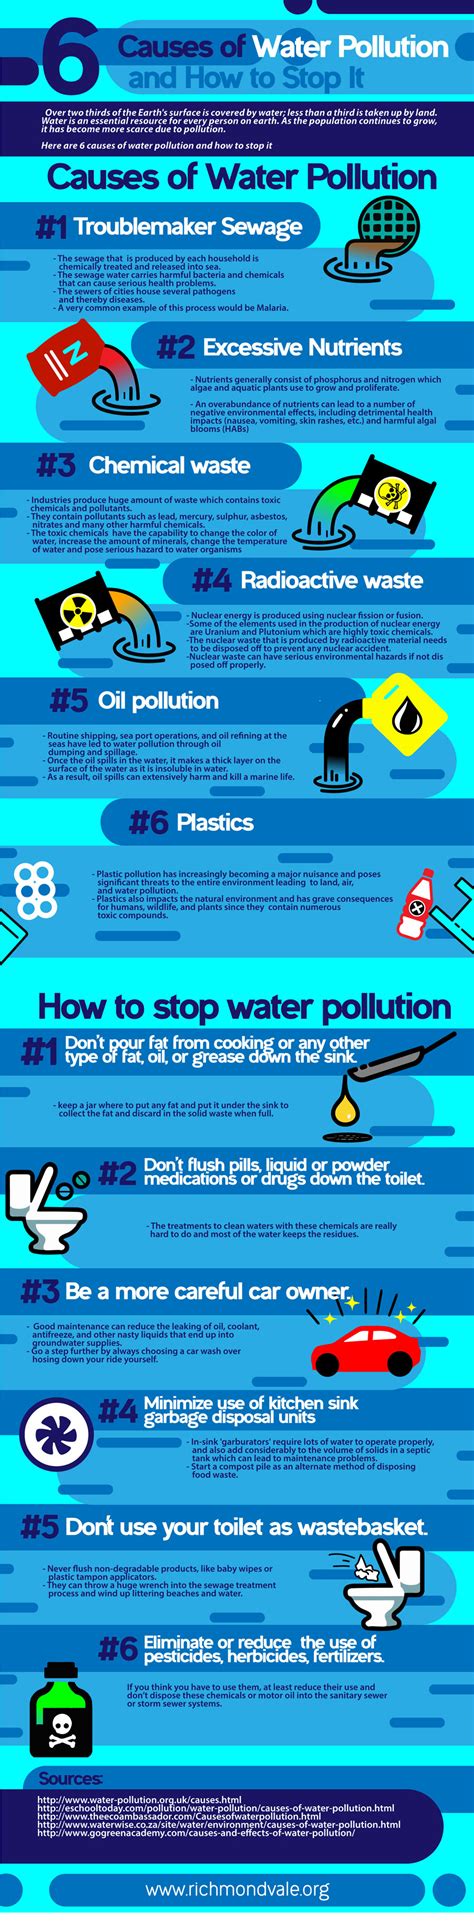 5 Types Of Water Pollution You Should Know World Water Forum 2015 Europa